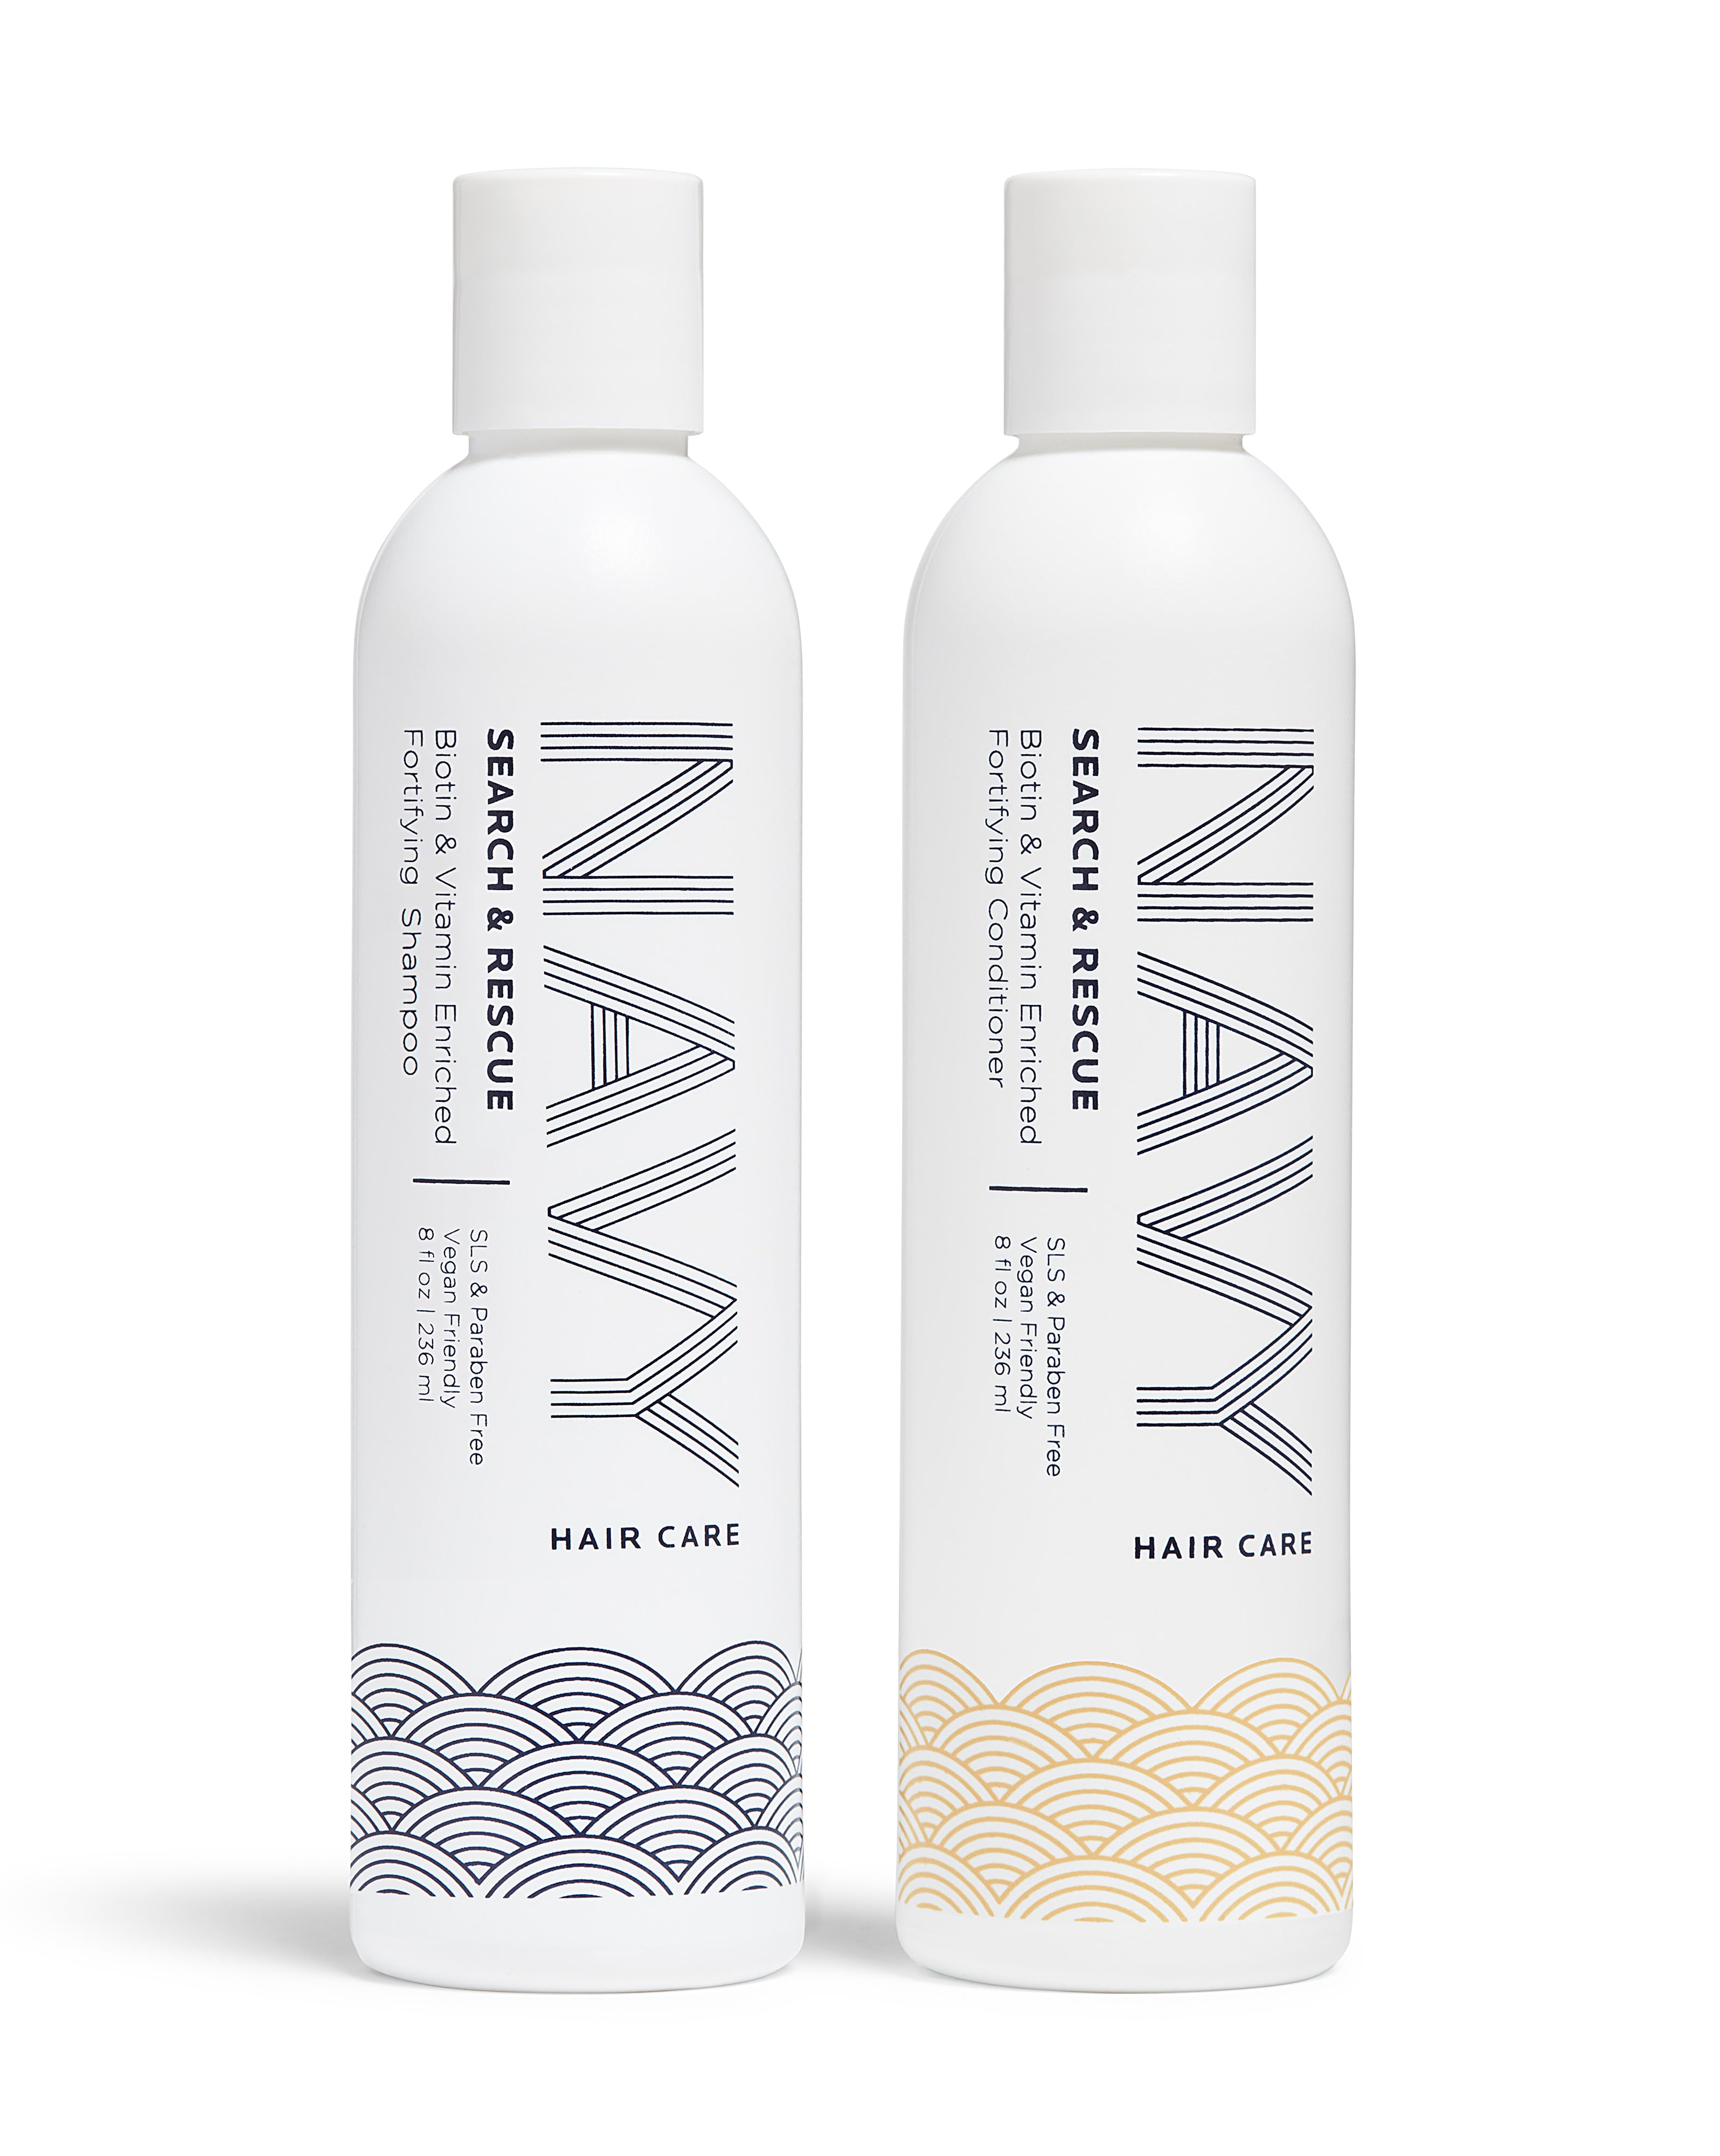 Search & Rescue - and Conditioner – Navy Care